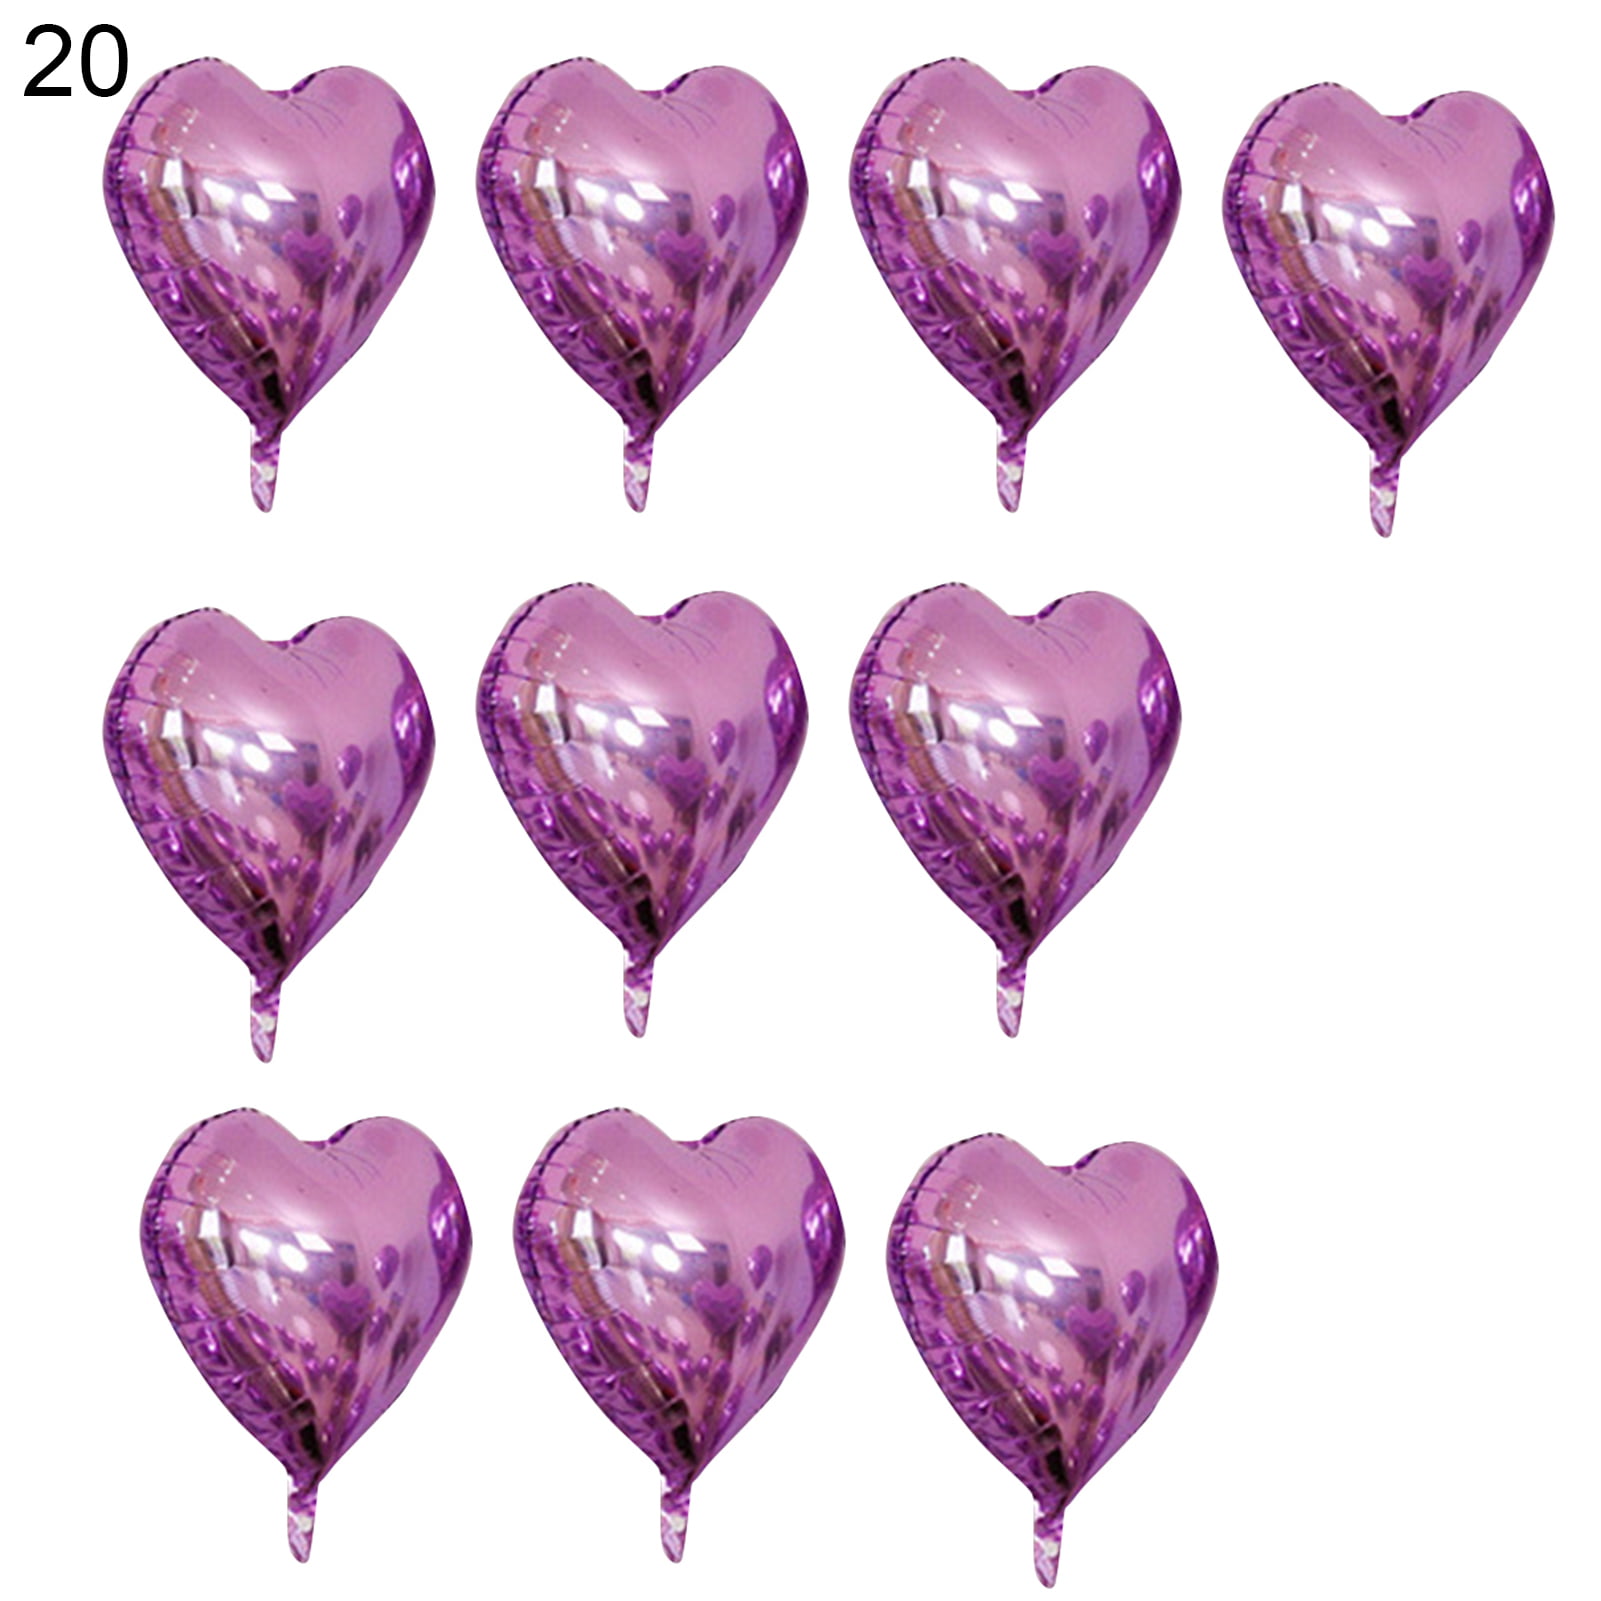 10Pcs 18" Birthday Party Decor Five-pointed Star Foil Balloon Wedding Decoration